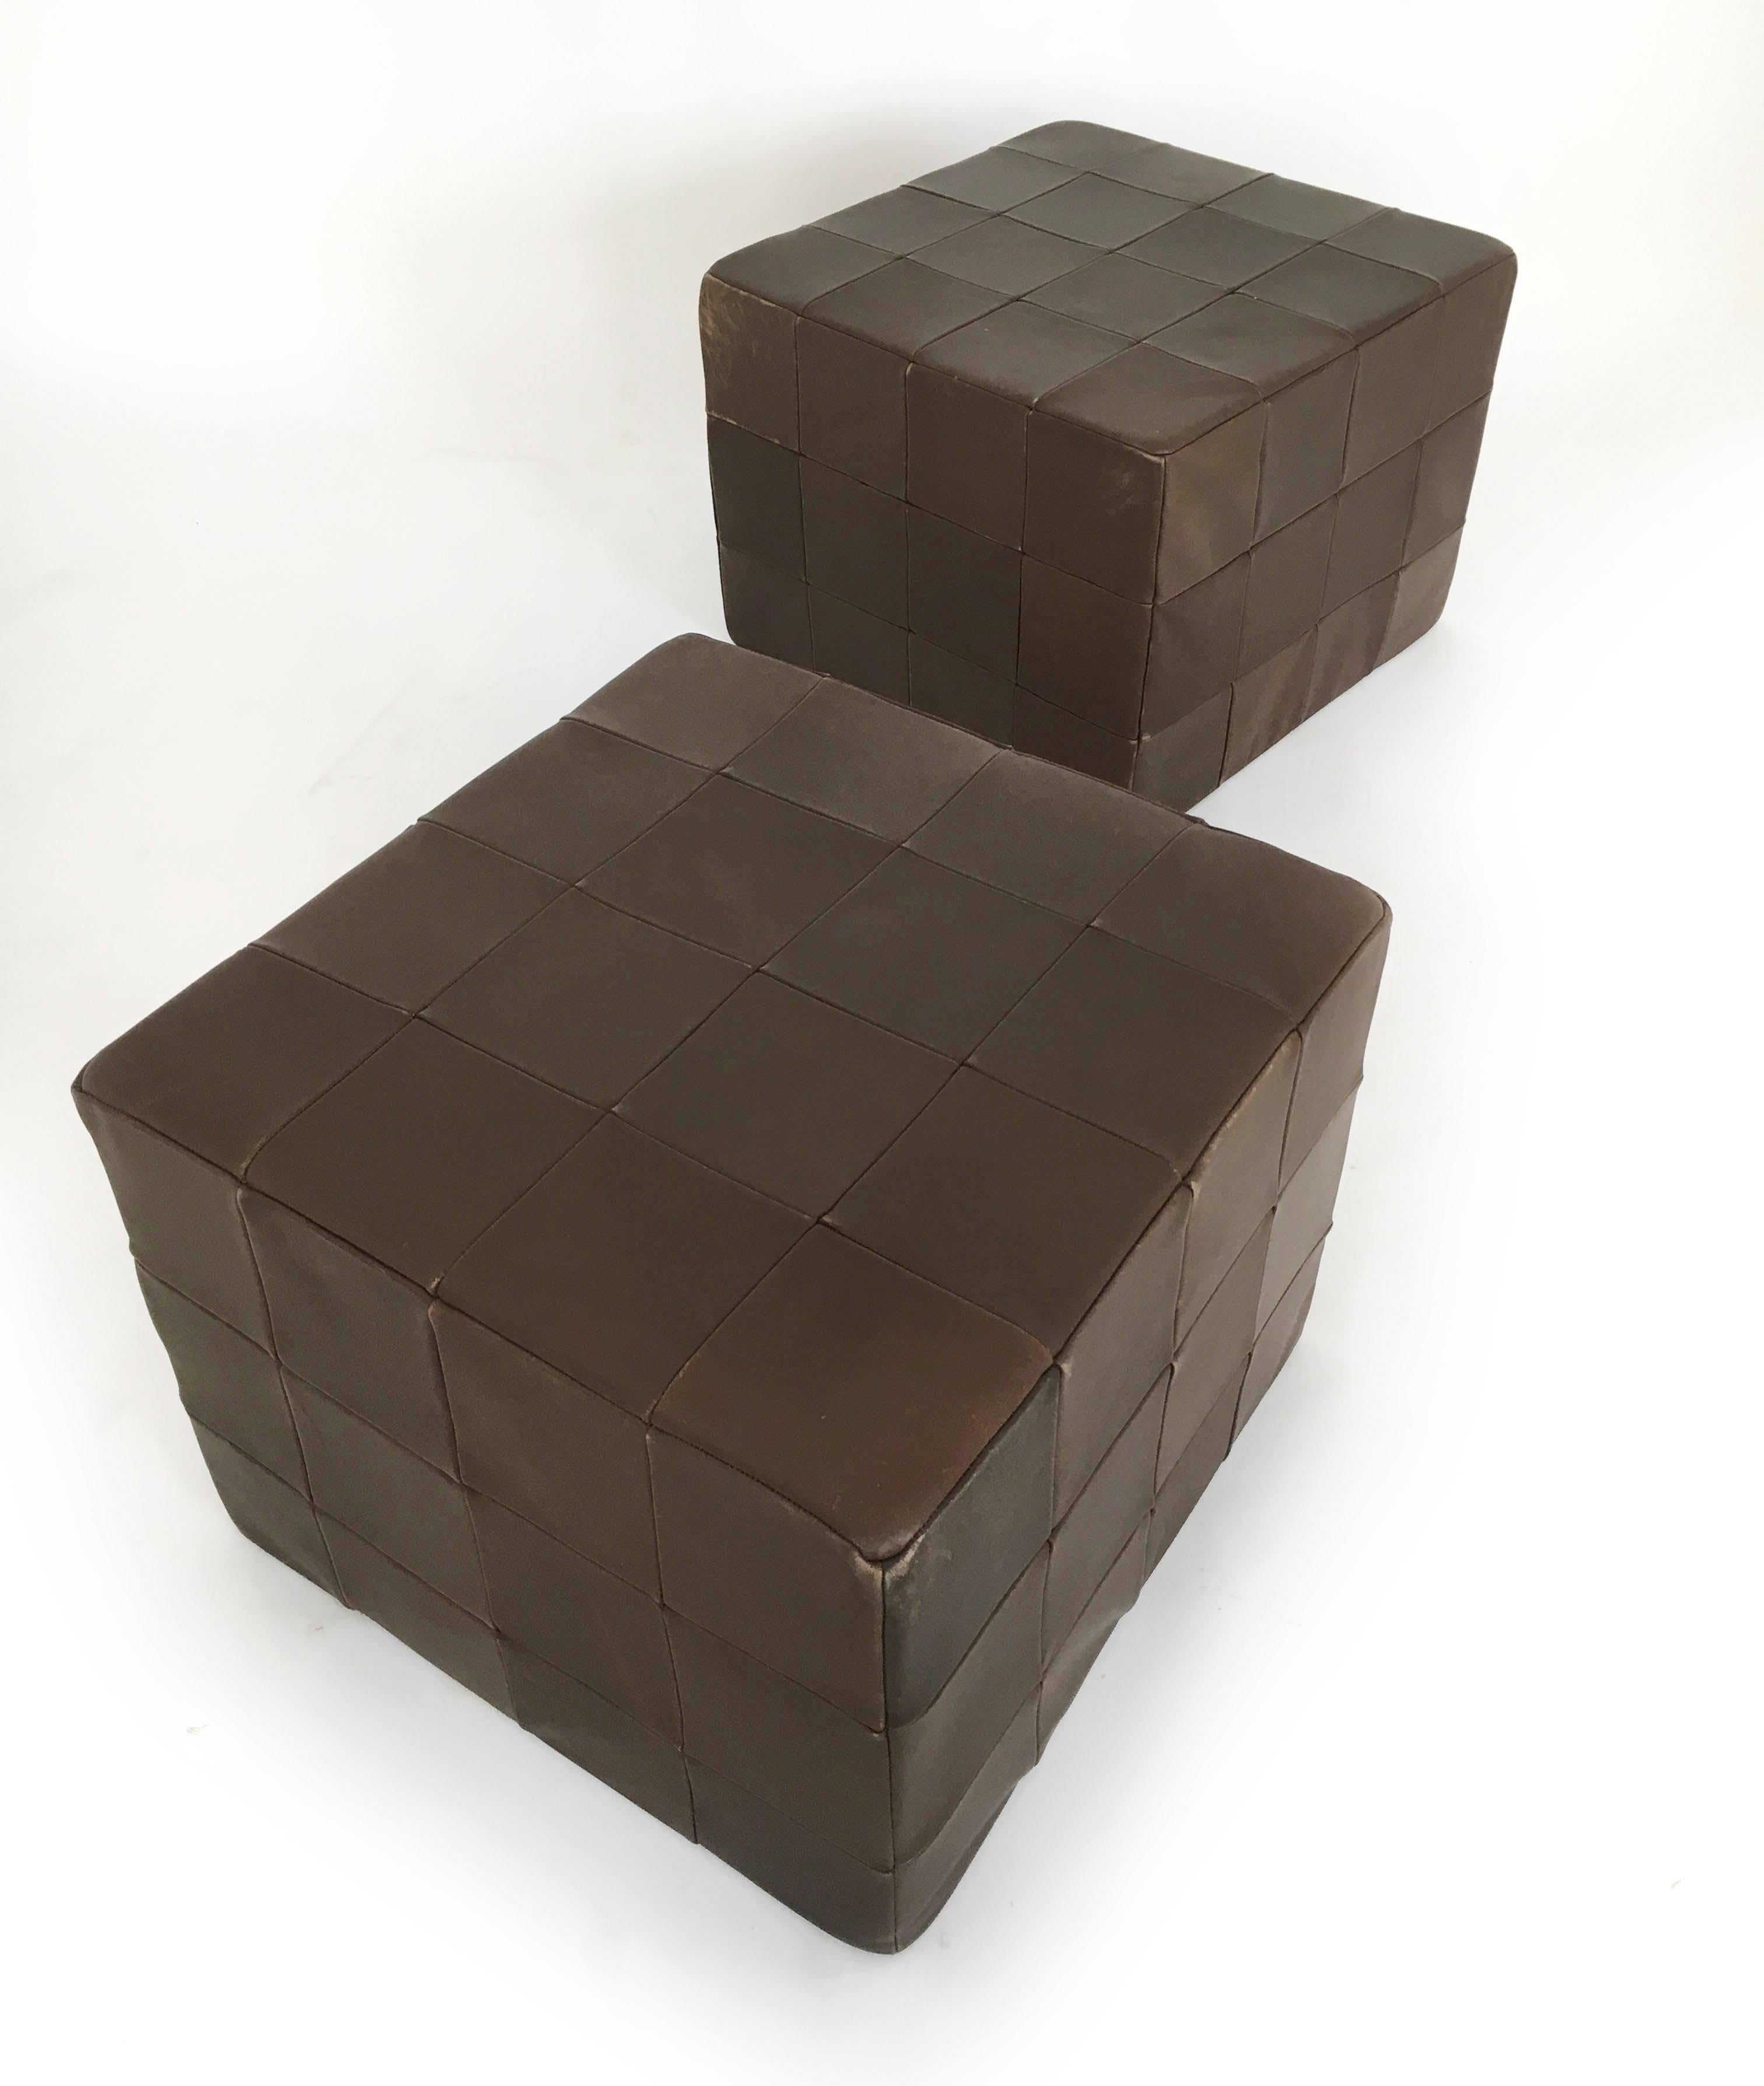 Late 20th Century De Sede Brown Leather Patchwork Cubes Ottomans, Switzerland 1970s For Sale